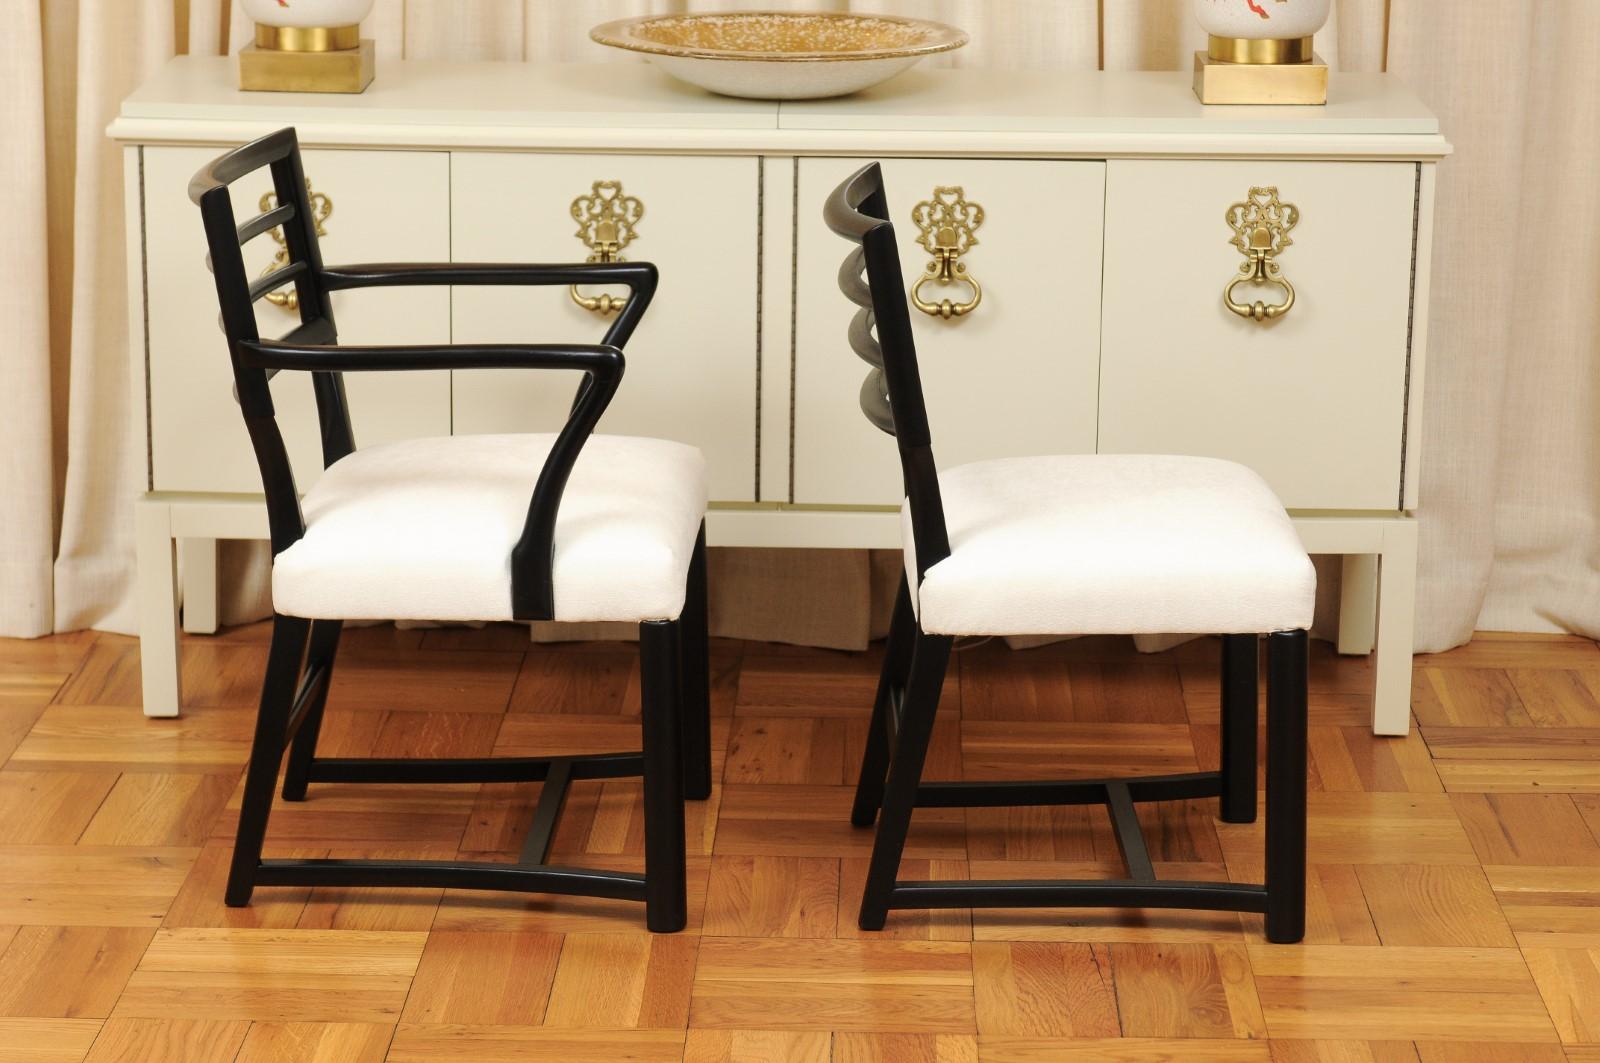 Mid-20th Century Spectacular Restored Set of 8 Modern Dining Chairs by Michael Taylor, circa 1957 For Sale